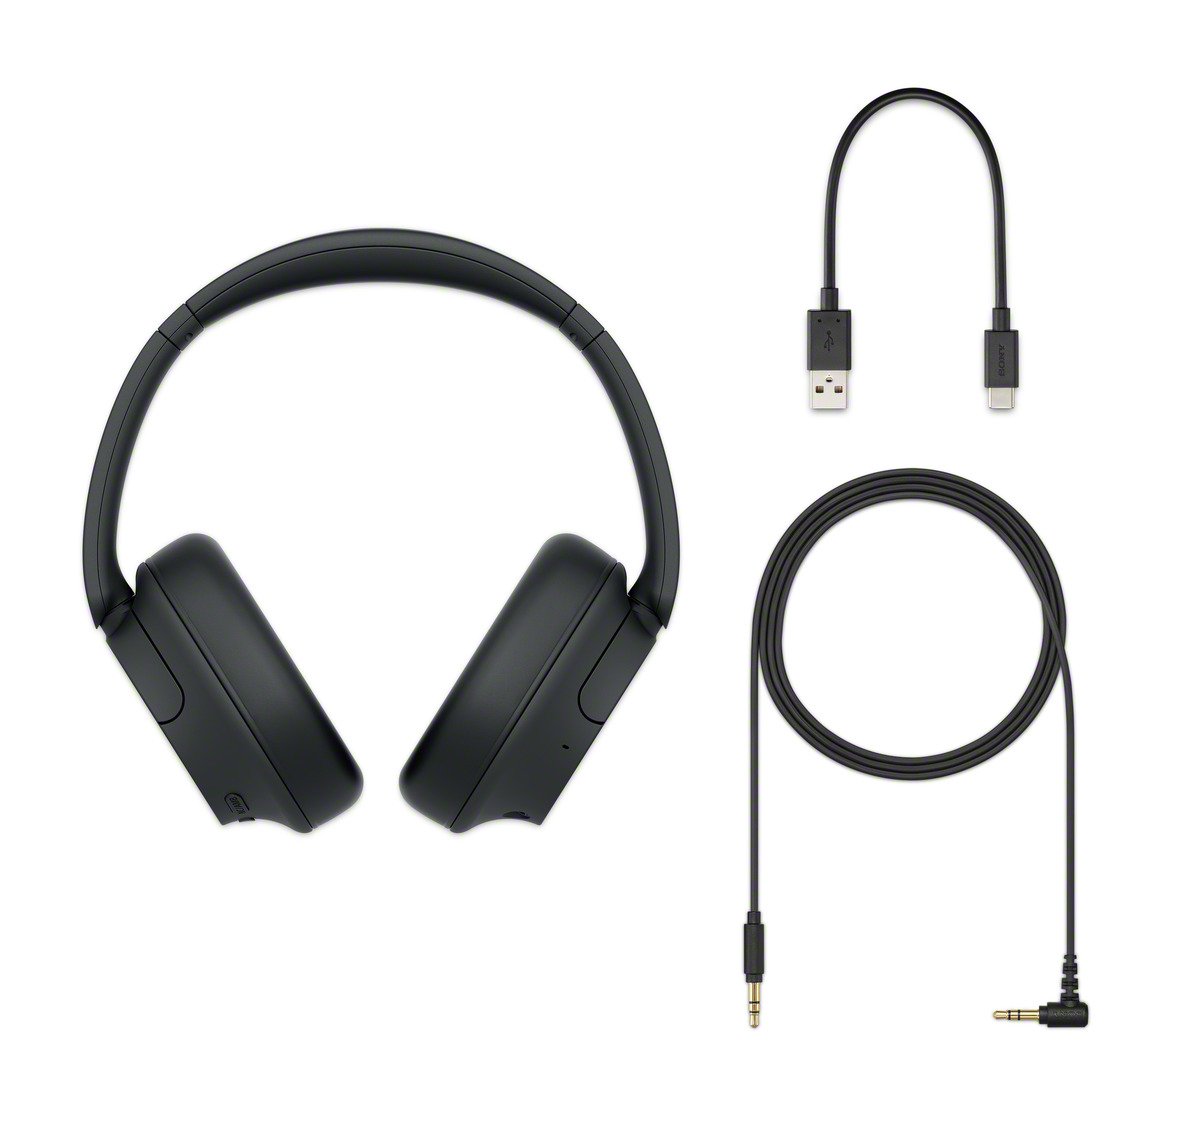 iTWire - Sony launches two new headphone models: WH-CH720N and WH-CH520